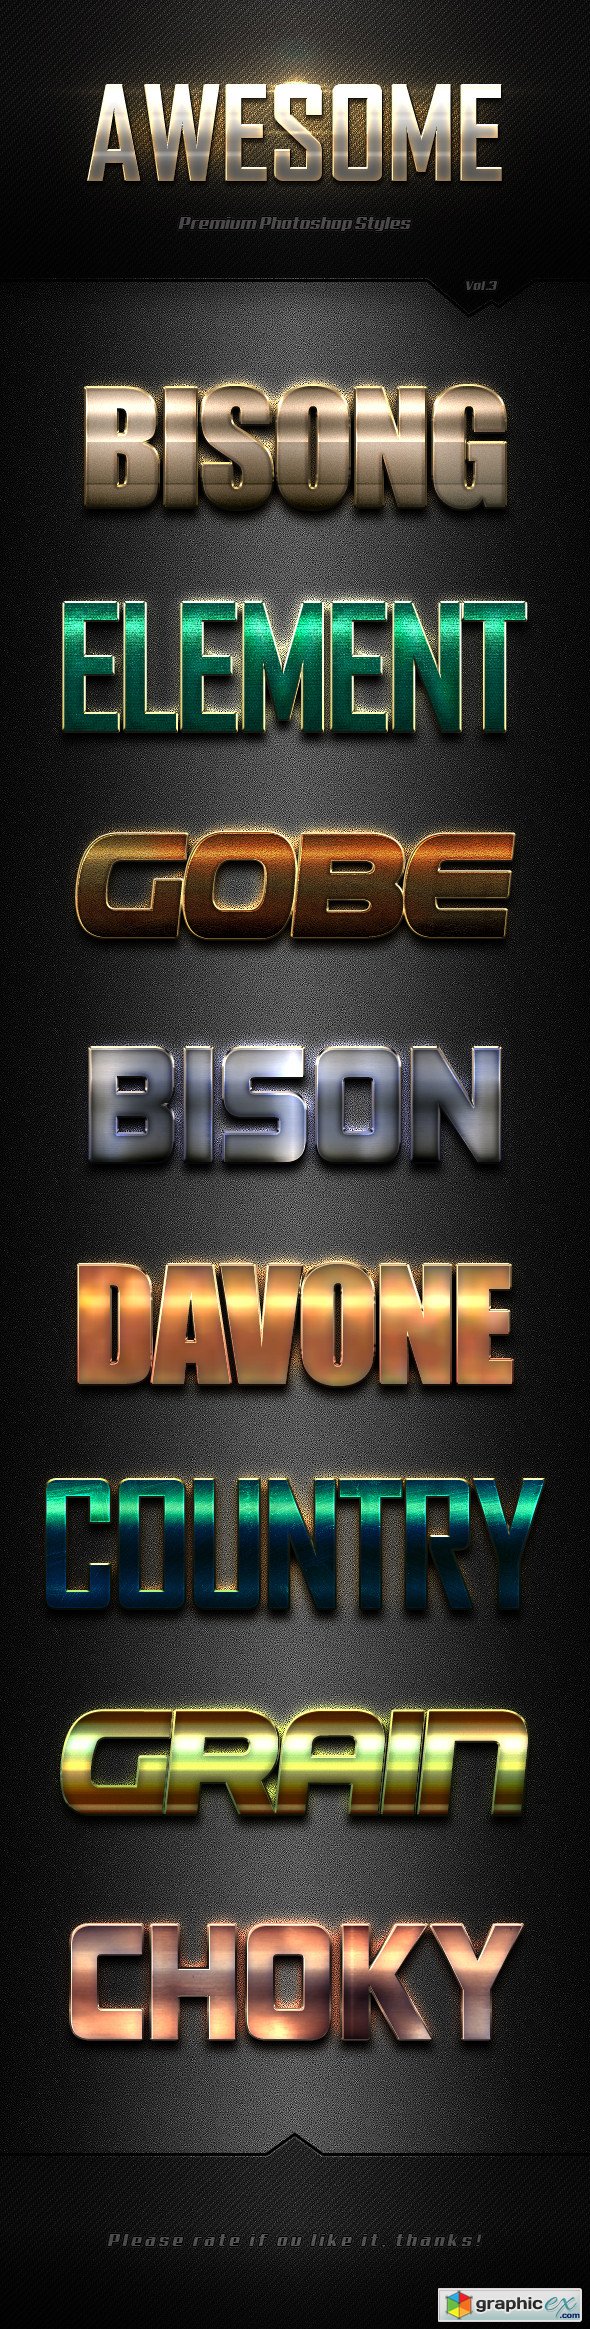 Awesome Photoshop Text Effects Vol.3